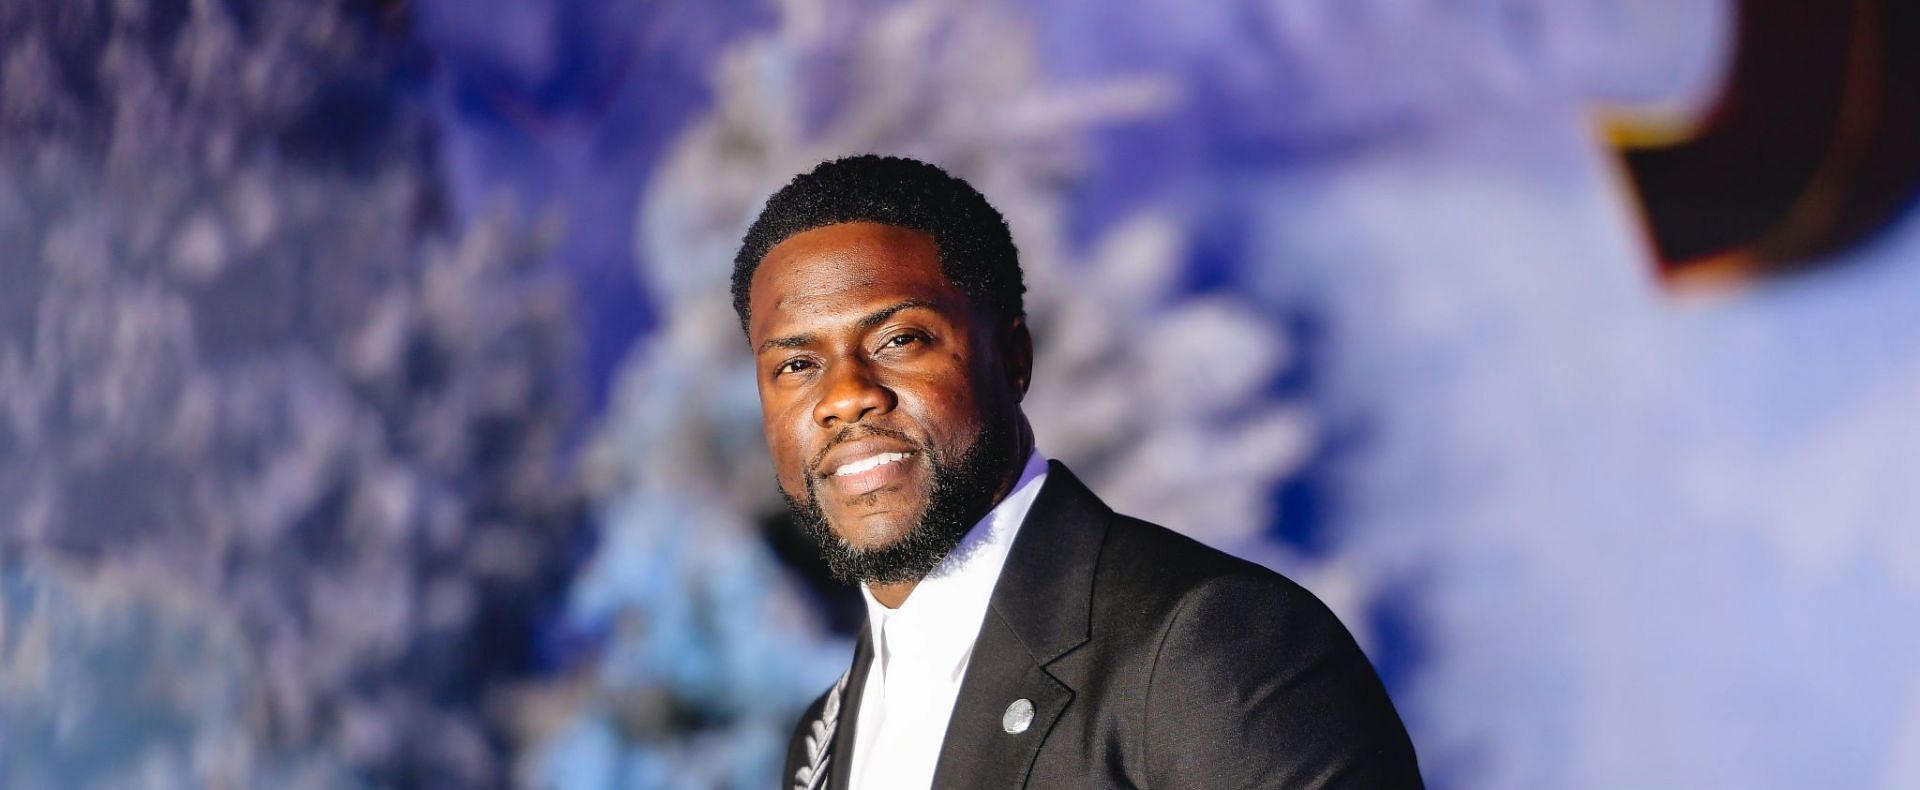 Kevin Hart grew up with his brother Robert in a single-parent household (Image via Getty Images)